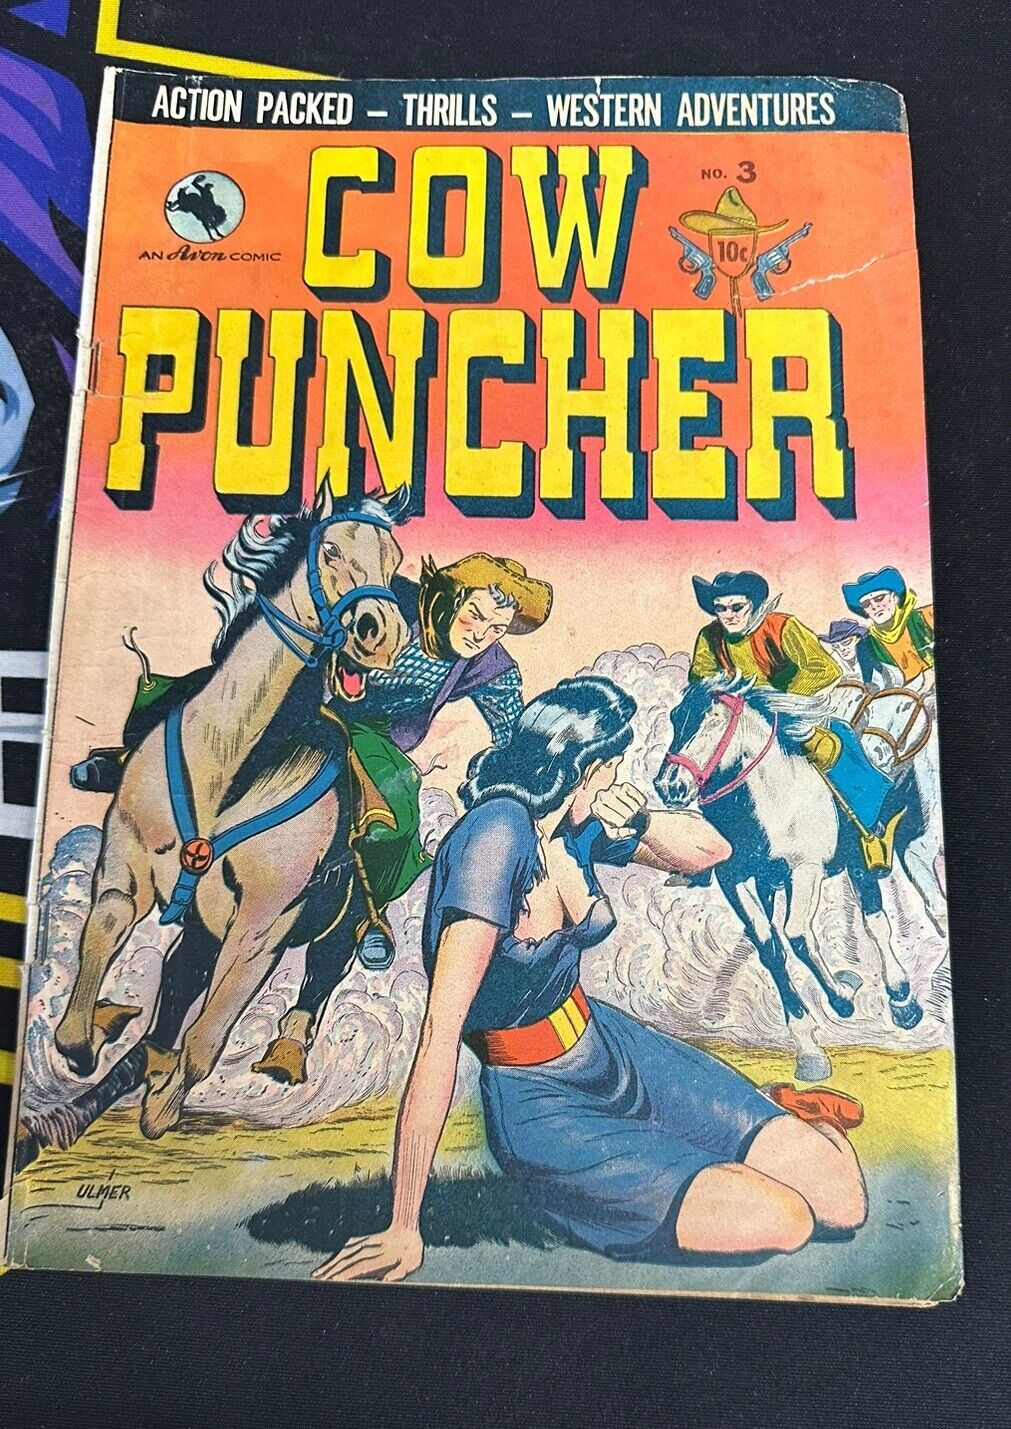 Cow Puncher #3 1948